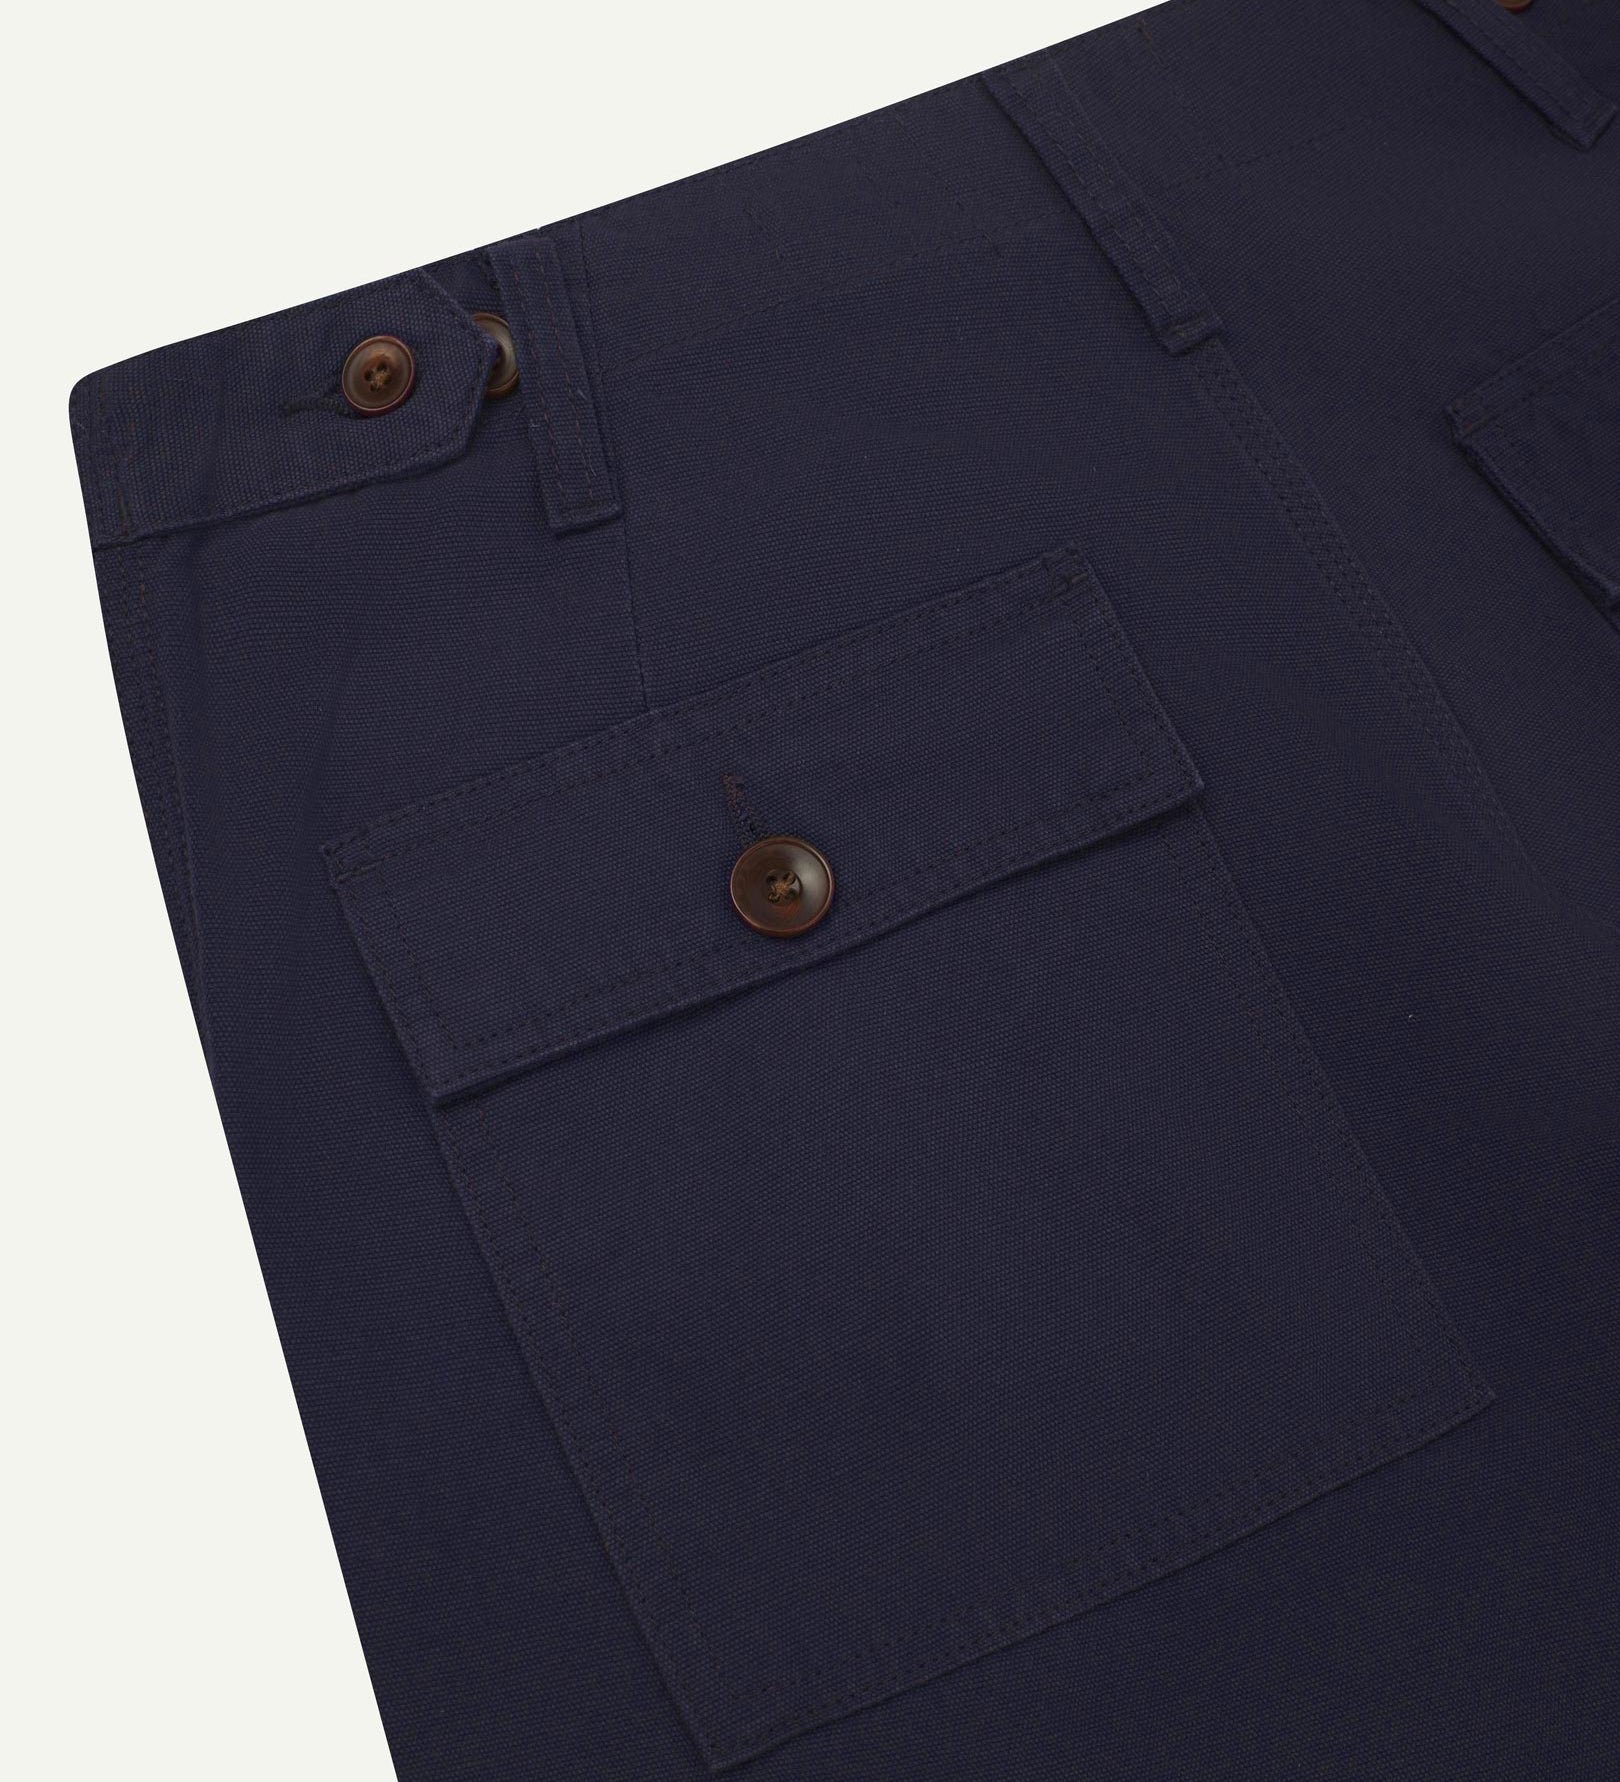 Reverse close-up of cargo pocket detailing and corozo buttons of the midnight blue 5014 pants from Uskees.